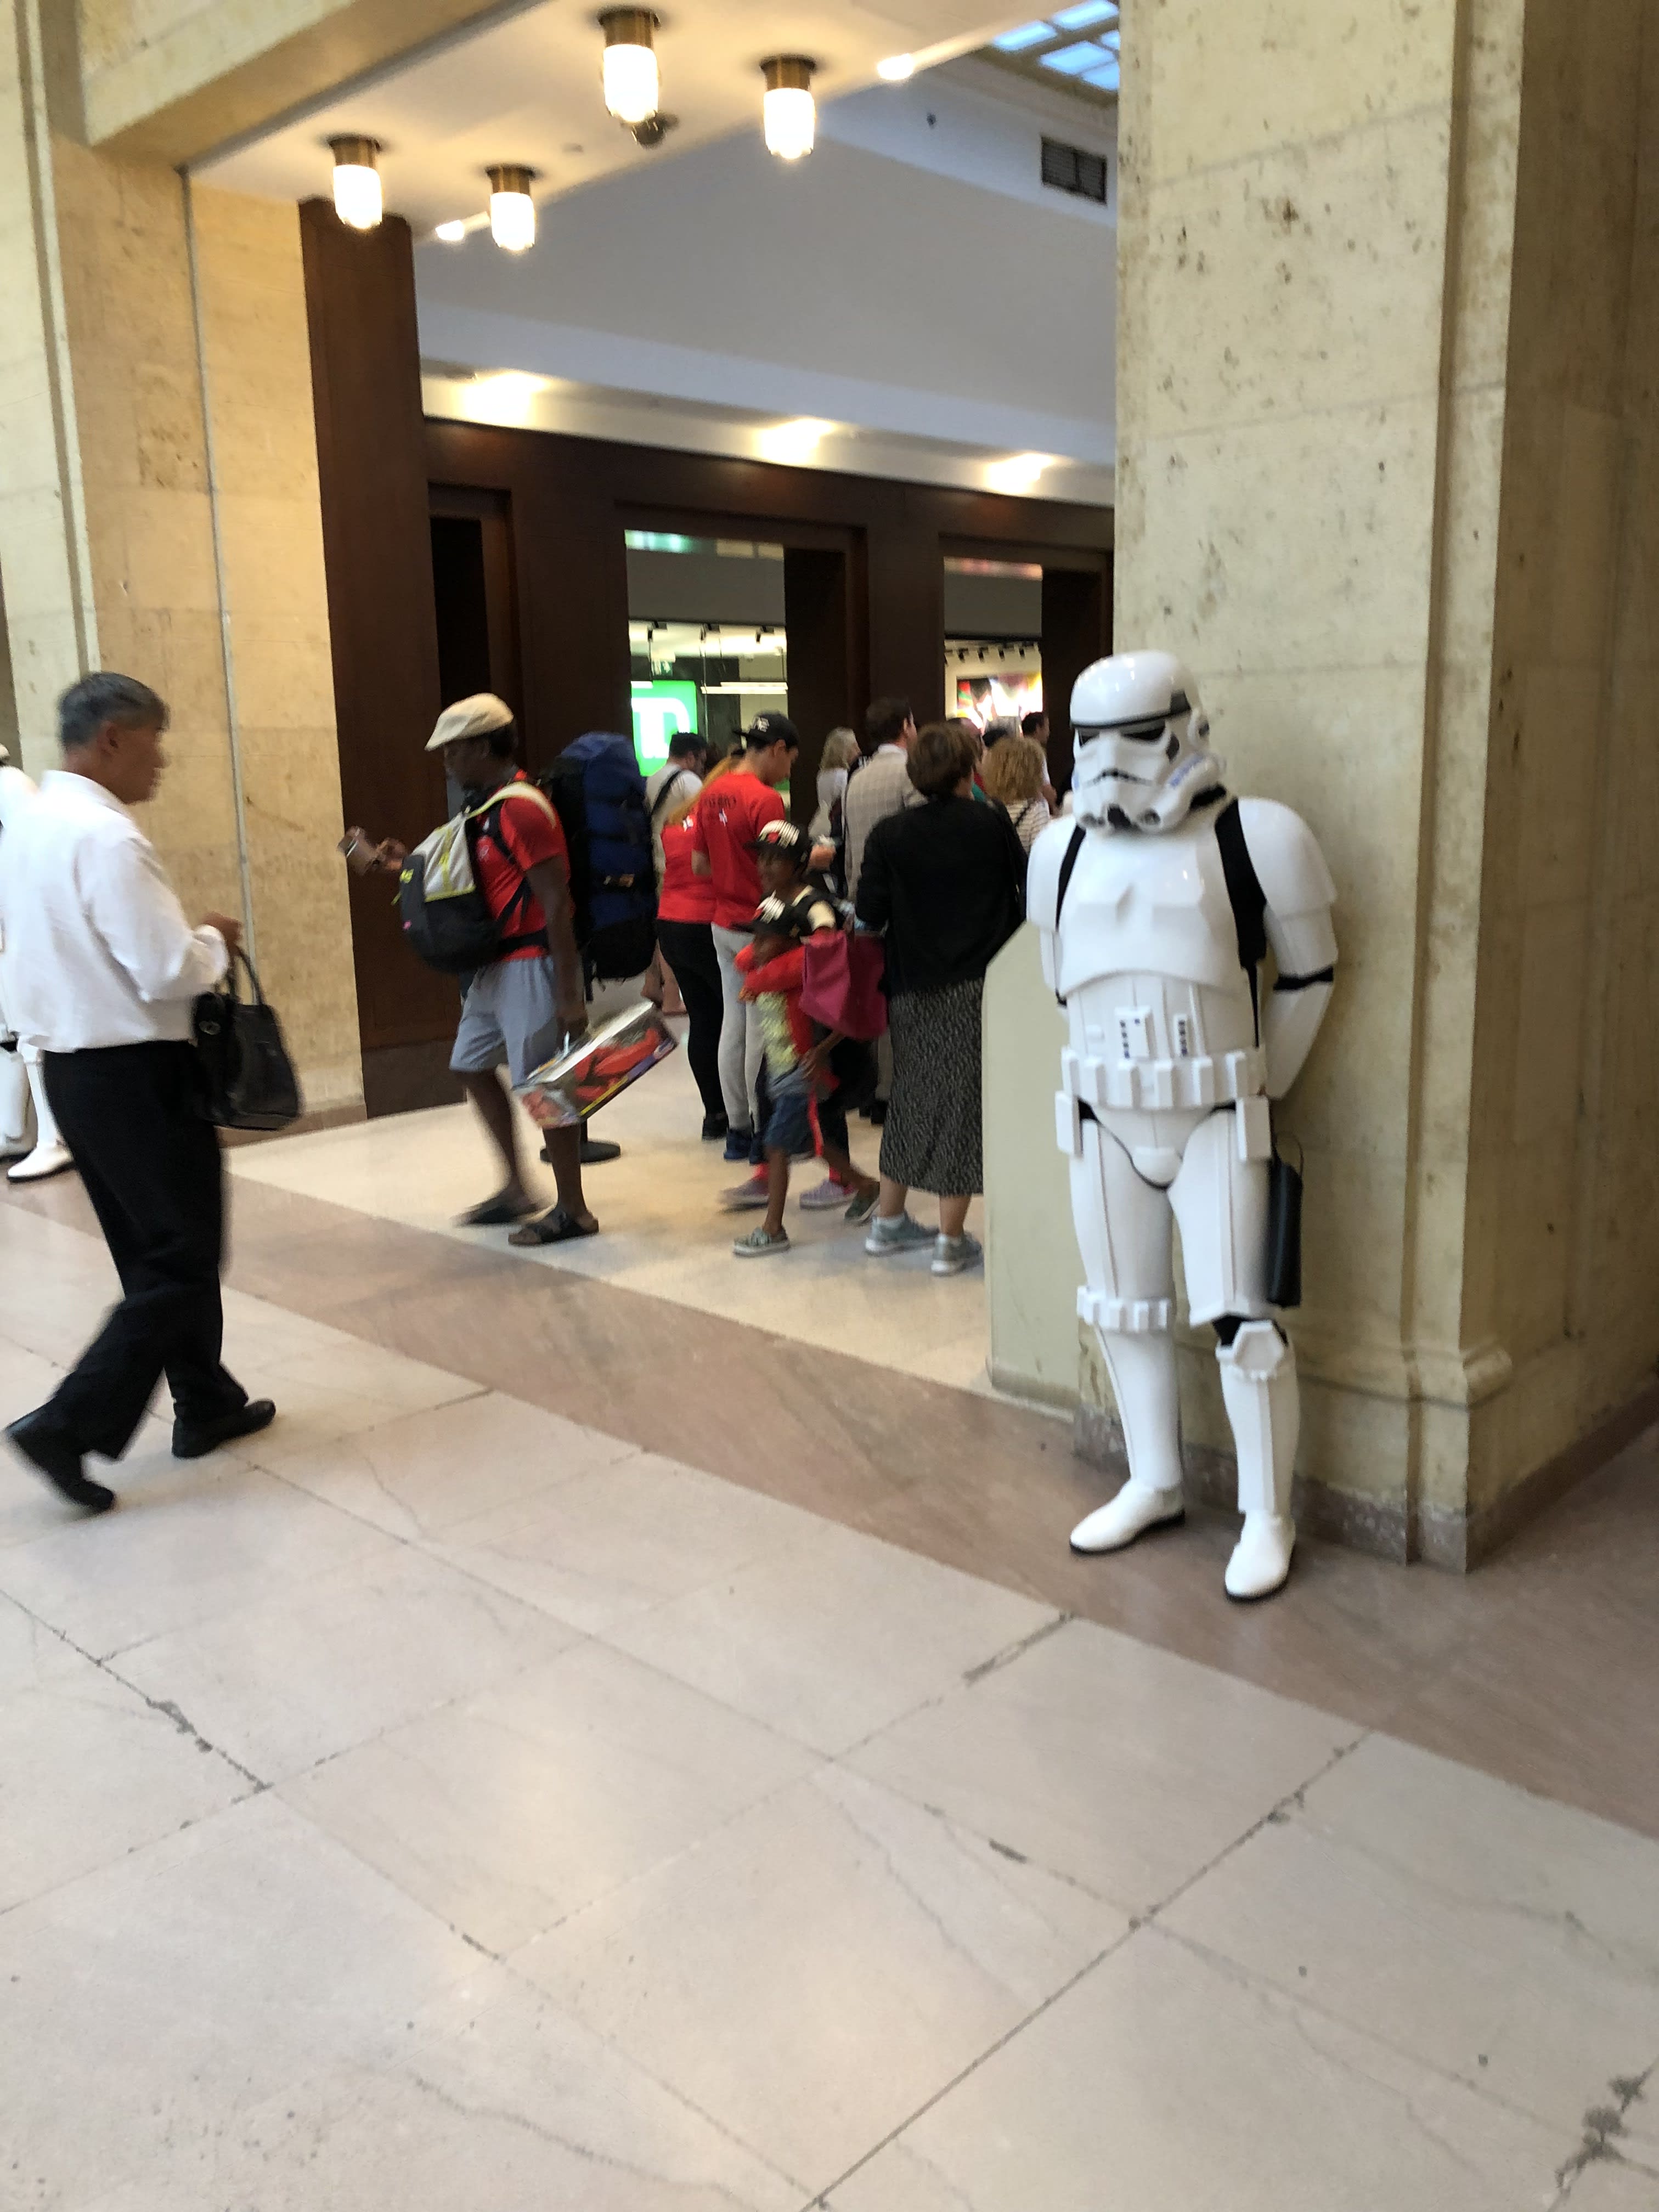 A Storm Trooper stands guard inside Union Station.